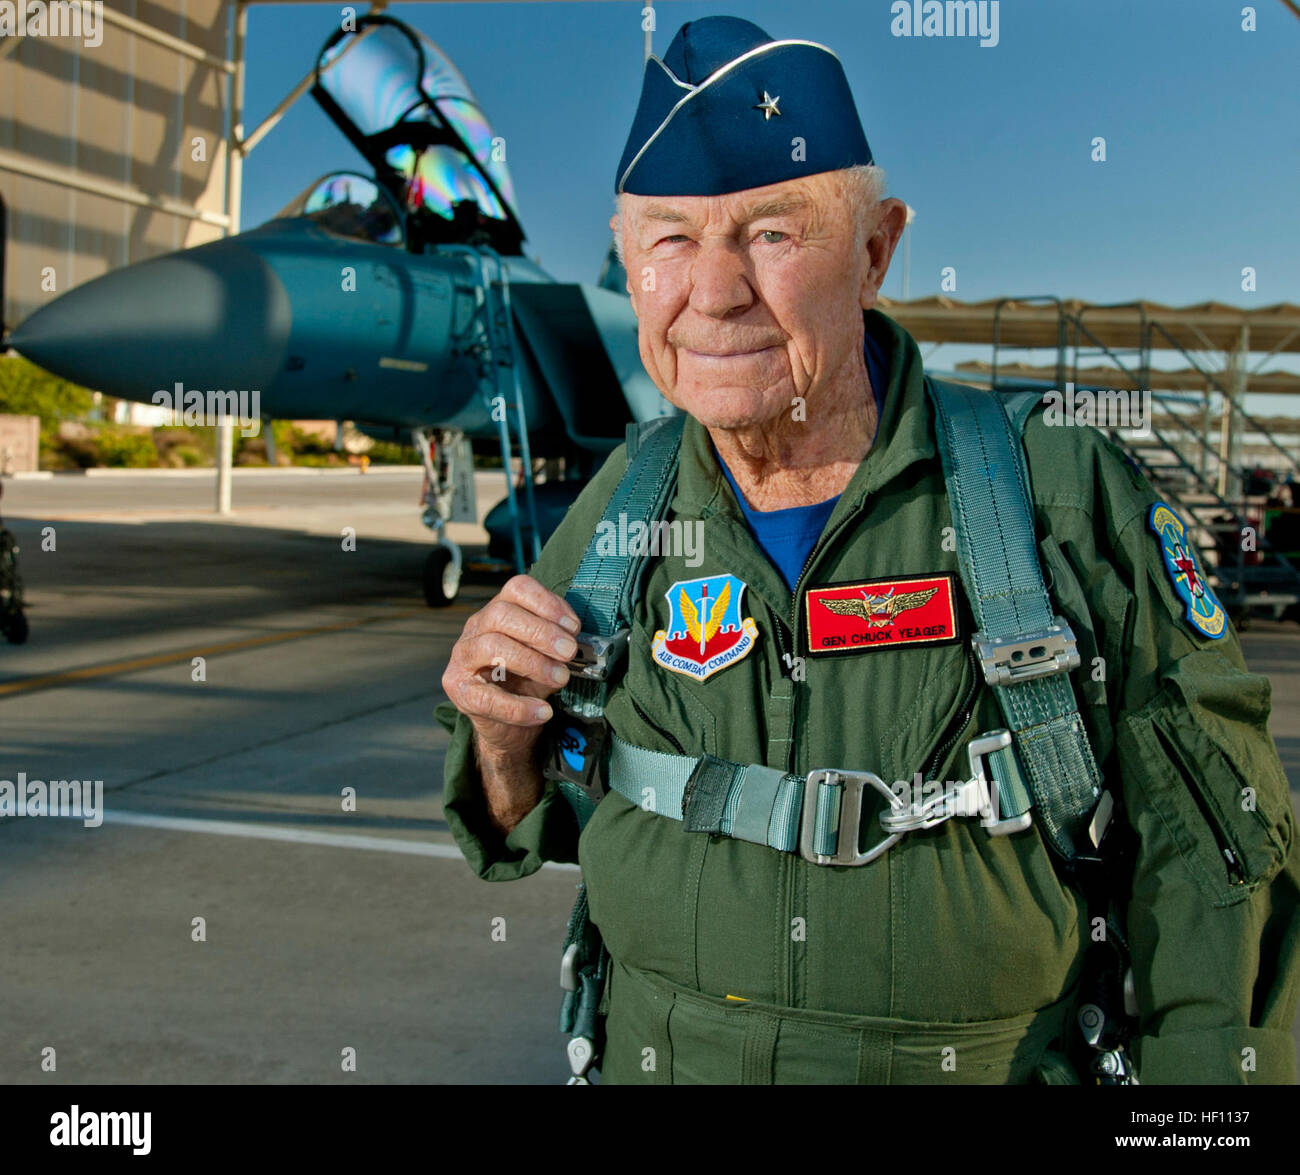 United States Air Force Brig. Gen. Charles E. 'Chuck' Yeager, retired, prepares to board an F-15D Eagle from the 65th Aggressor Squadron Oct. 14, 2012, at Nellis Air Force Base, Nev. In a jet piloted by Capt. David Vincent, 65th AGRS pilot, Yeager is commemorating the 65th anniversary of his historic breaking of the sound barrier flight, Oct. 14, 1947, in the Bell XS-1 rocket research plane named 'Glamorous Glennis.' Yeager was awarded the prestigious Collier Trophy in 1948 for this landmark aeronautical achievement. Flickr - DVIDSHUB - Chuck Yeager commemorates historic flight (Image 26 of 26 Stock Photo